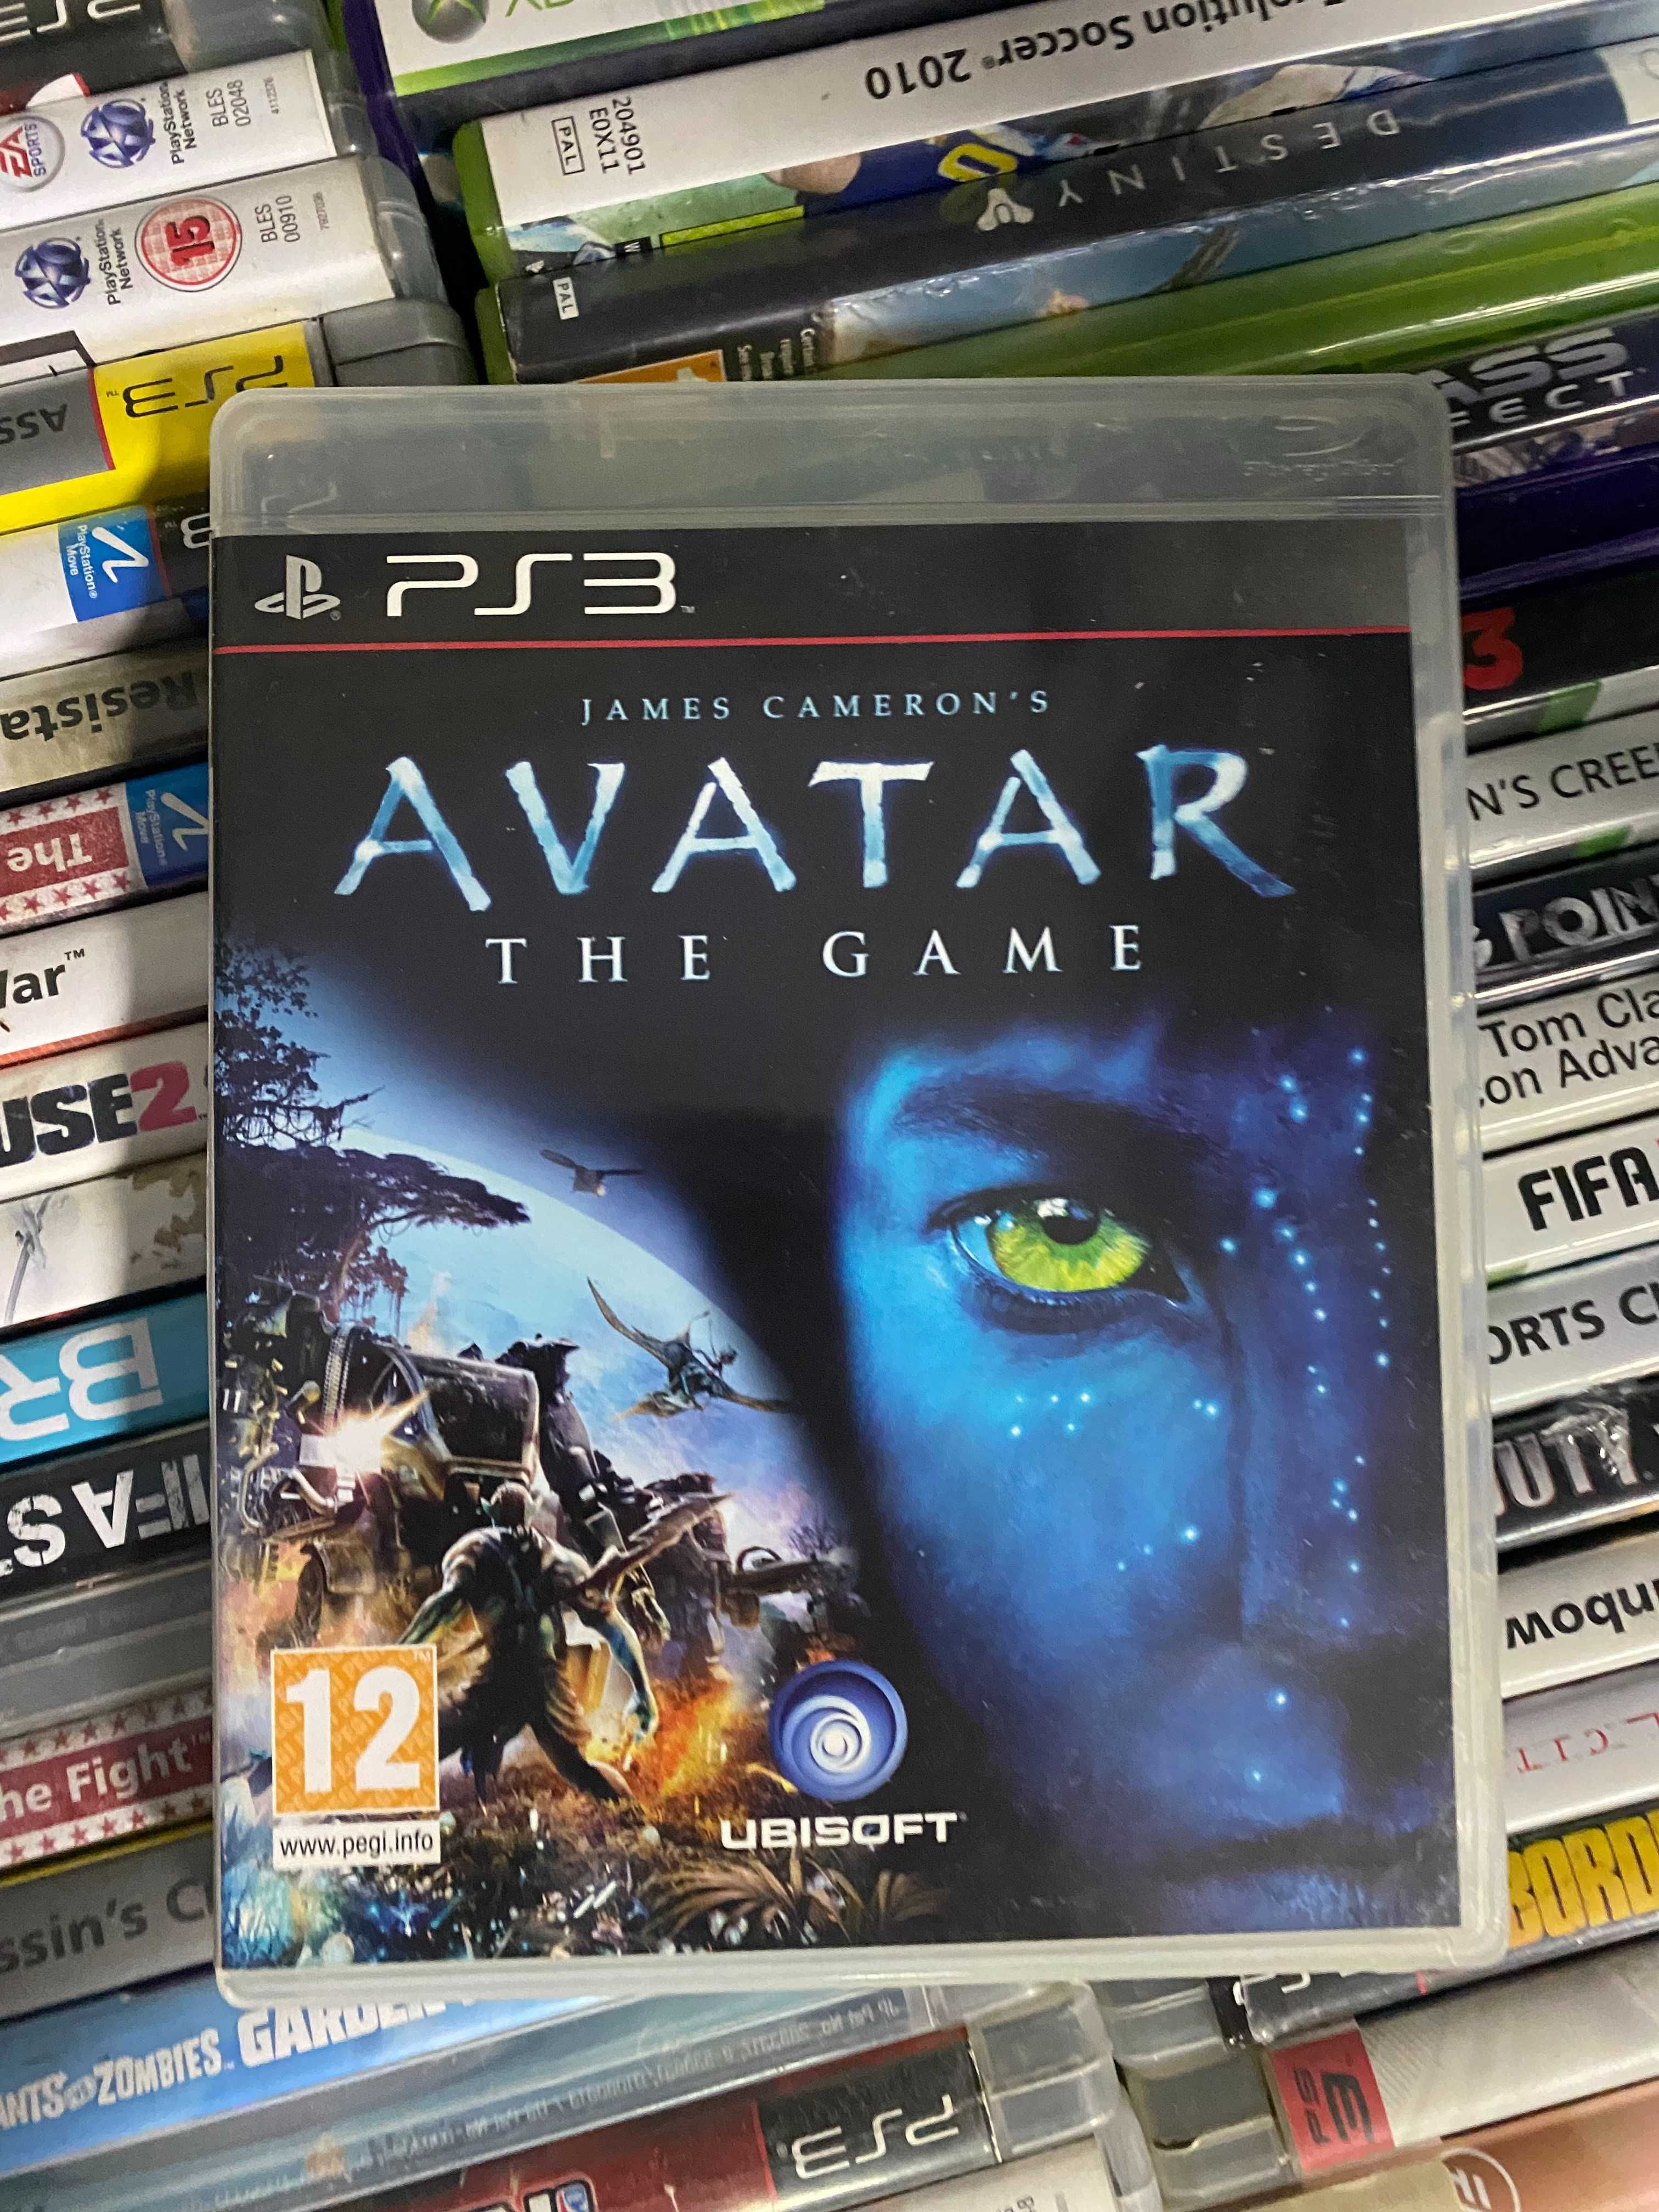 Avatar the Game|PS3